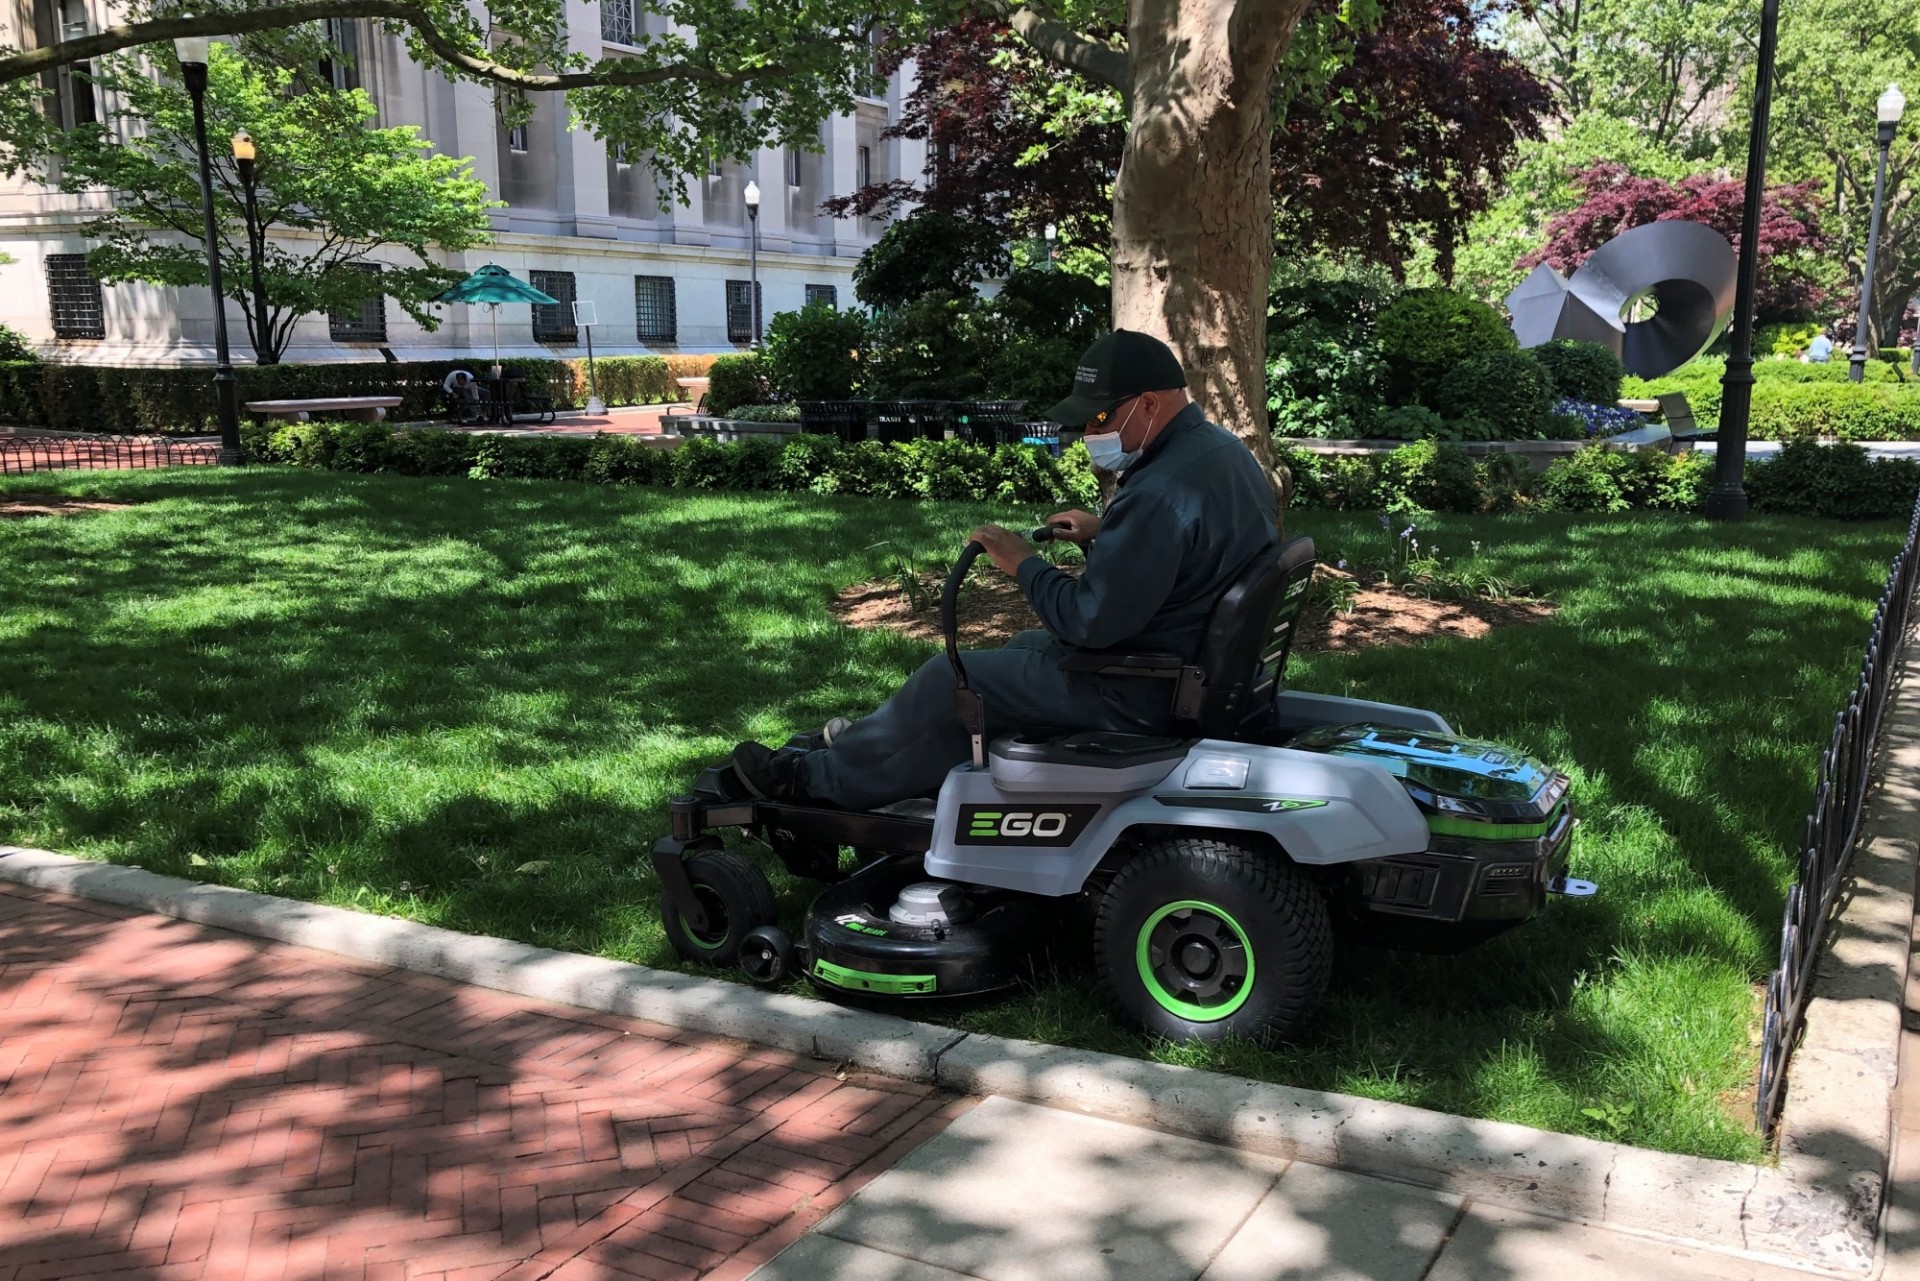 A person sitting in an electrical riding lawnmower, mowing a patch of grass next to Low Library.